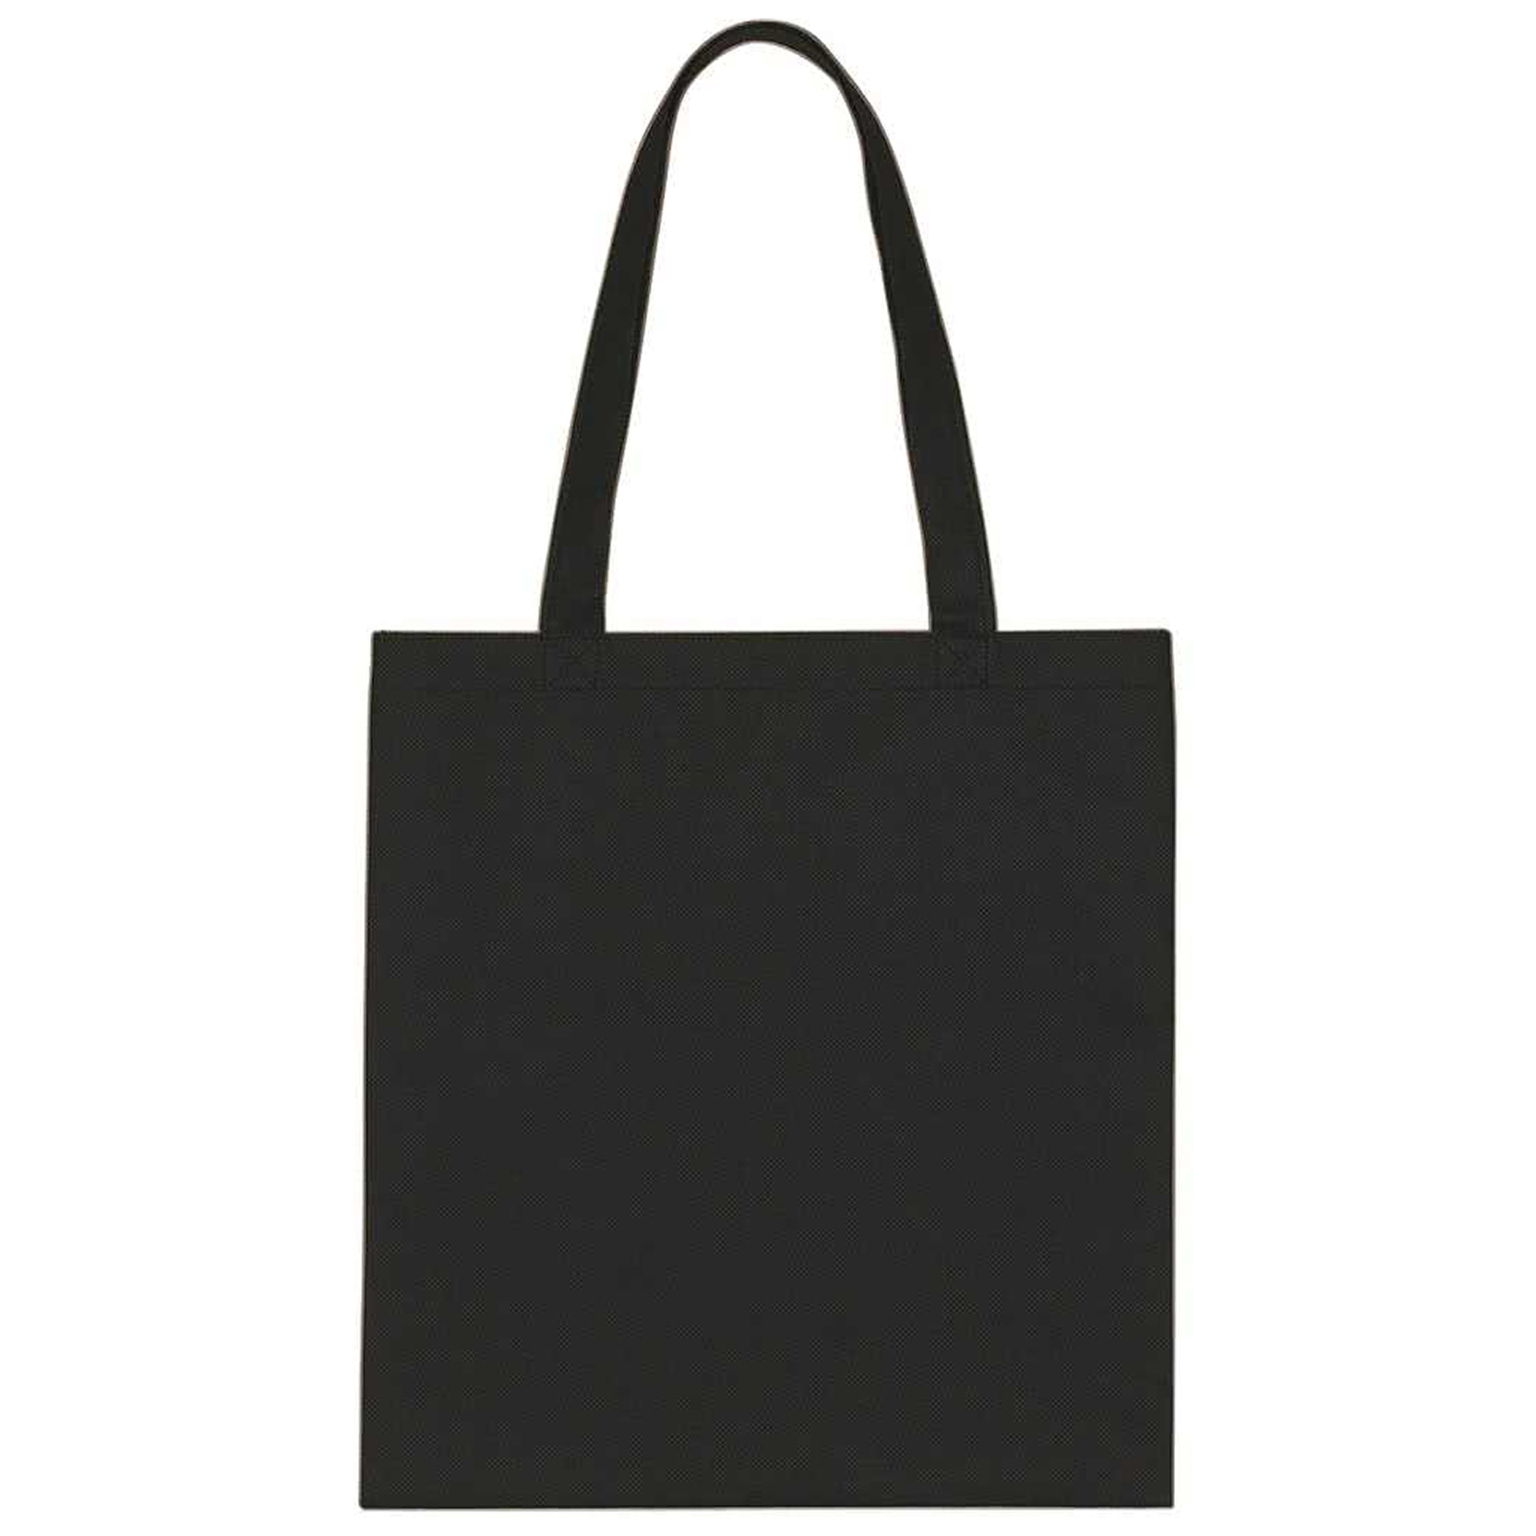 Wholesale Recycled Shopping Totes - Black, 240 Count | DollarDays